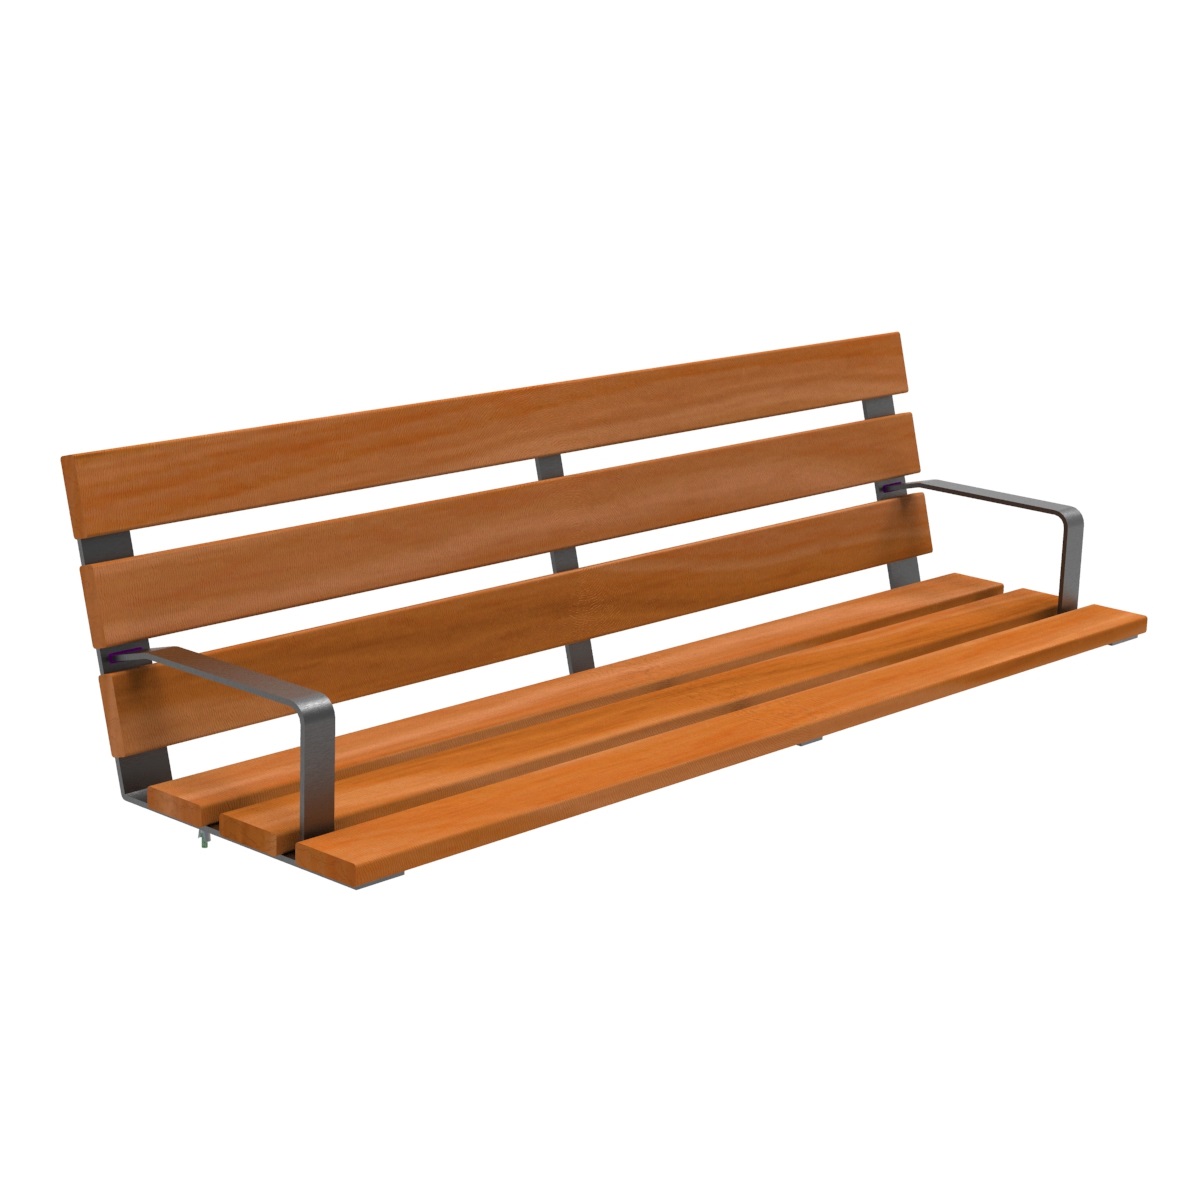 Montserrat bench with steel supports and tropical wood